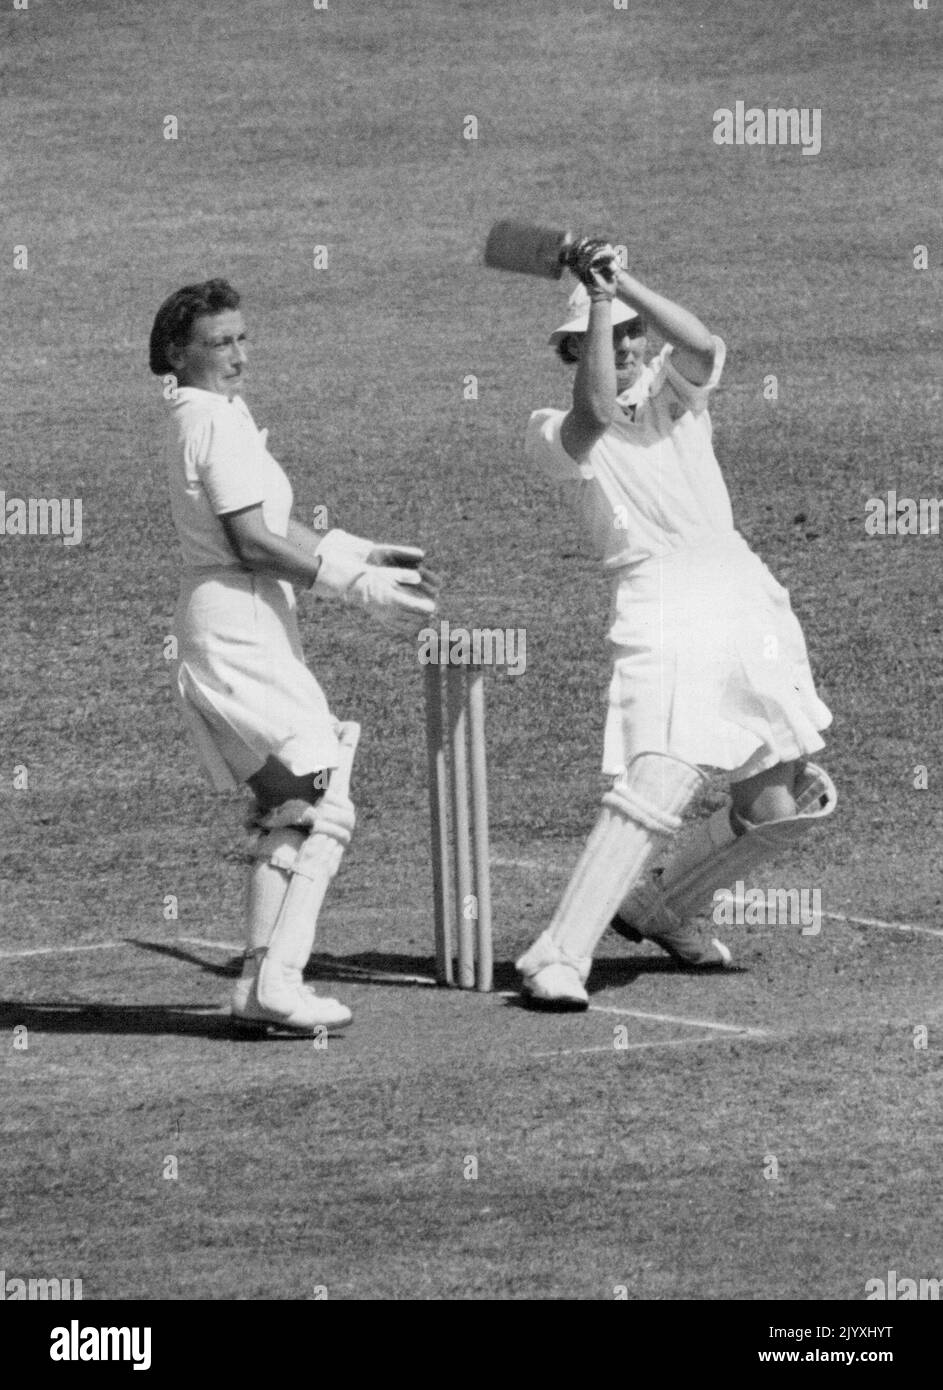 Hefty hit for four by J. Schmidt during an Australian XI's seconds innings against England in Brisbane. She made 37. December 20, 1948. Stock Photo